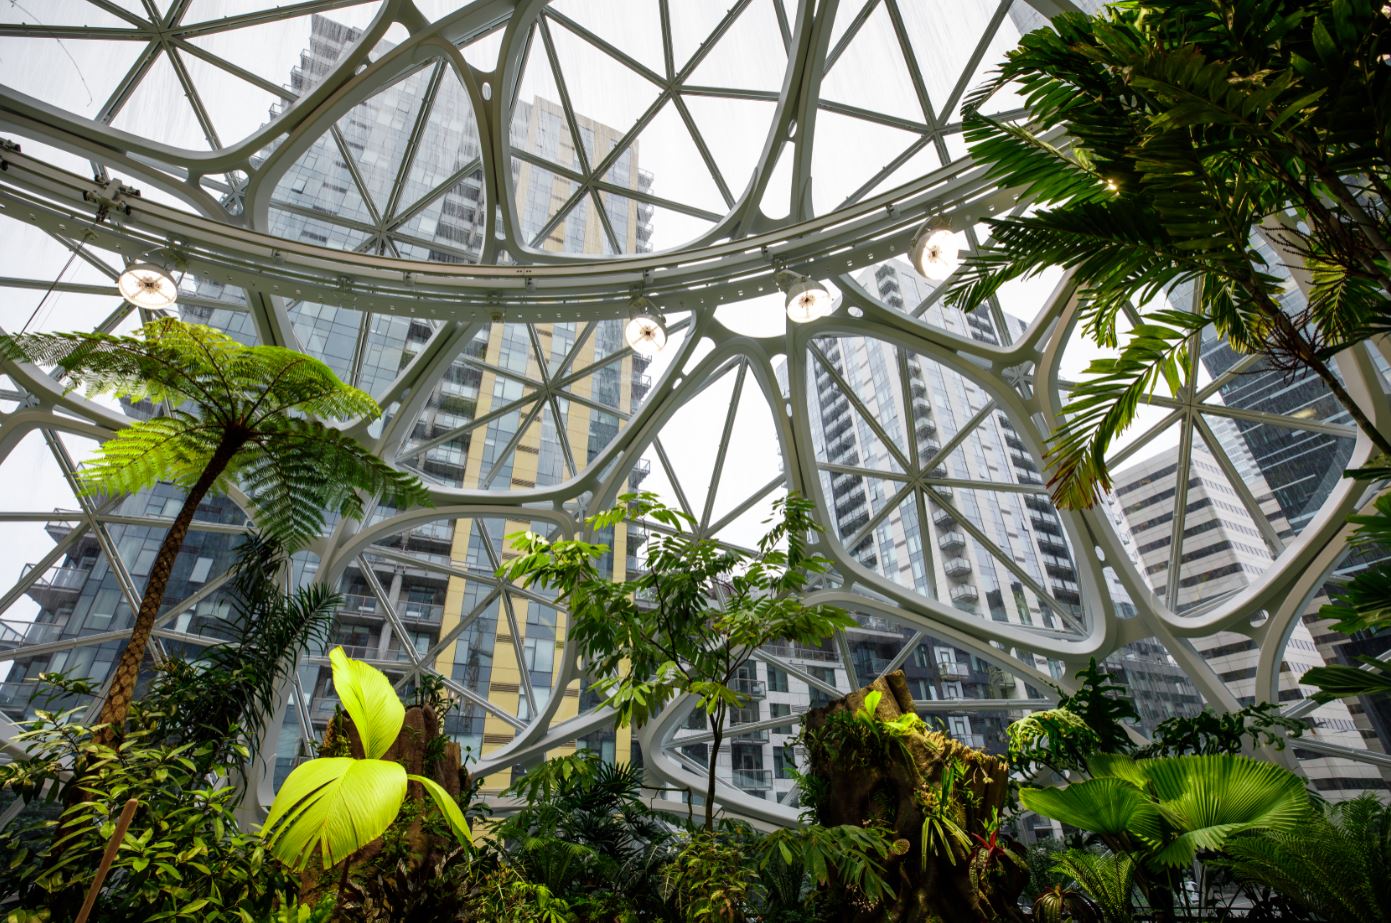 Biophilic design has a long history and an even bigger future